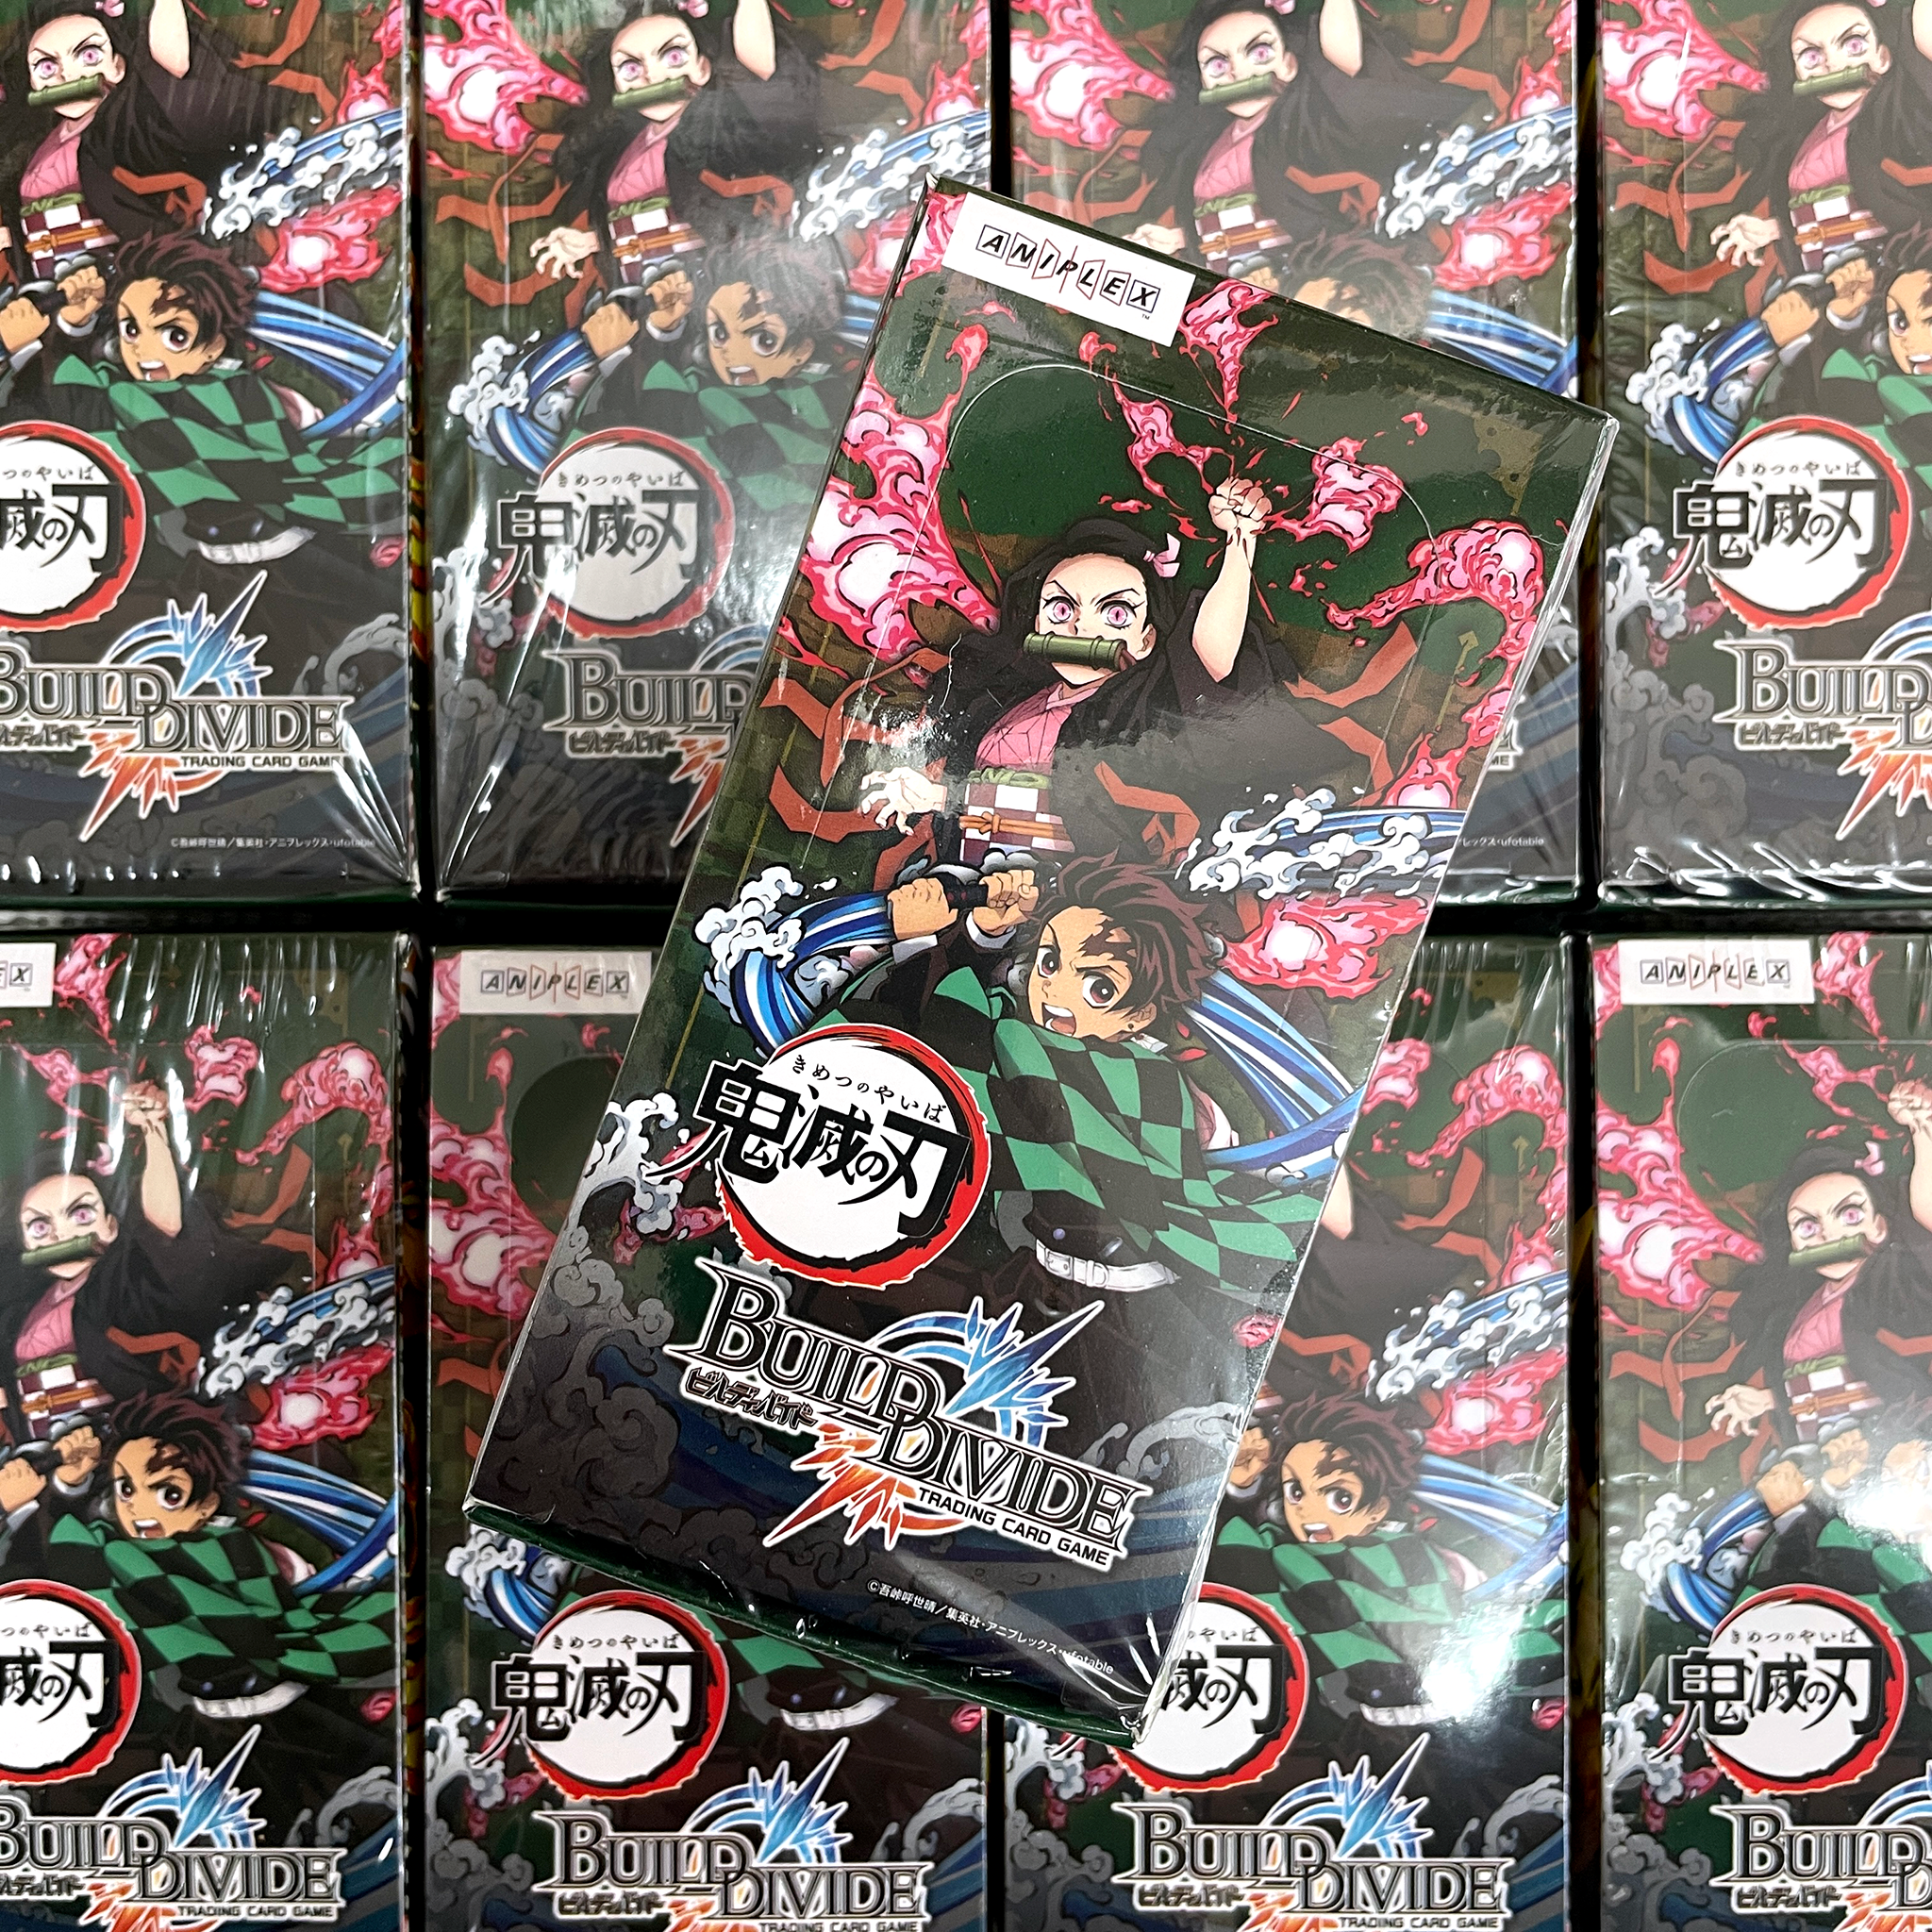 BUILD DIVIDE TCG Tie-Up Booster Kimetsu no Yaiba Box  Release date: July 1 2022  16 booster pack / box  7 cards / booster pack  Demon Slayer